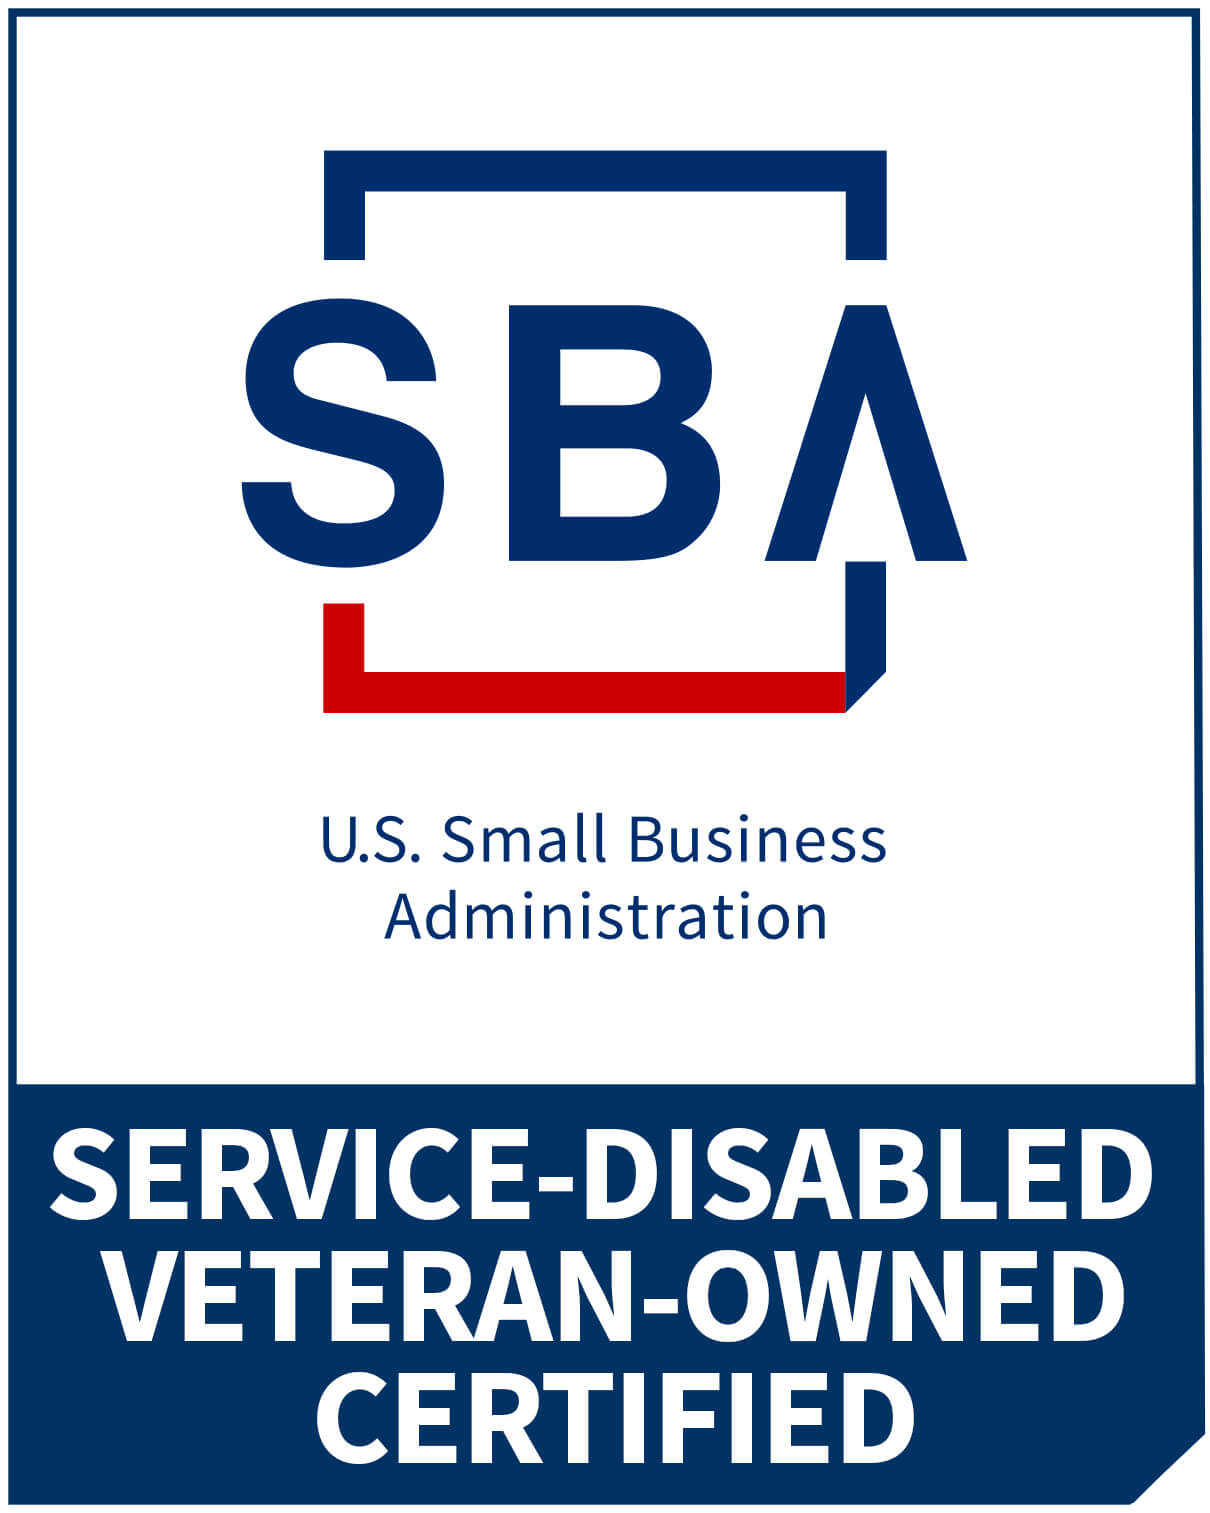 Service-Disabled_Veteran-Owned-Certified_1673881541503-1